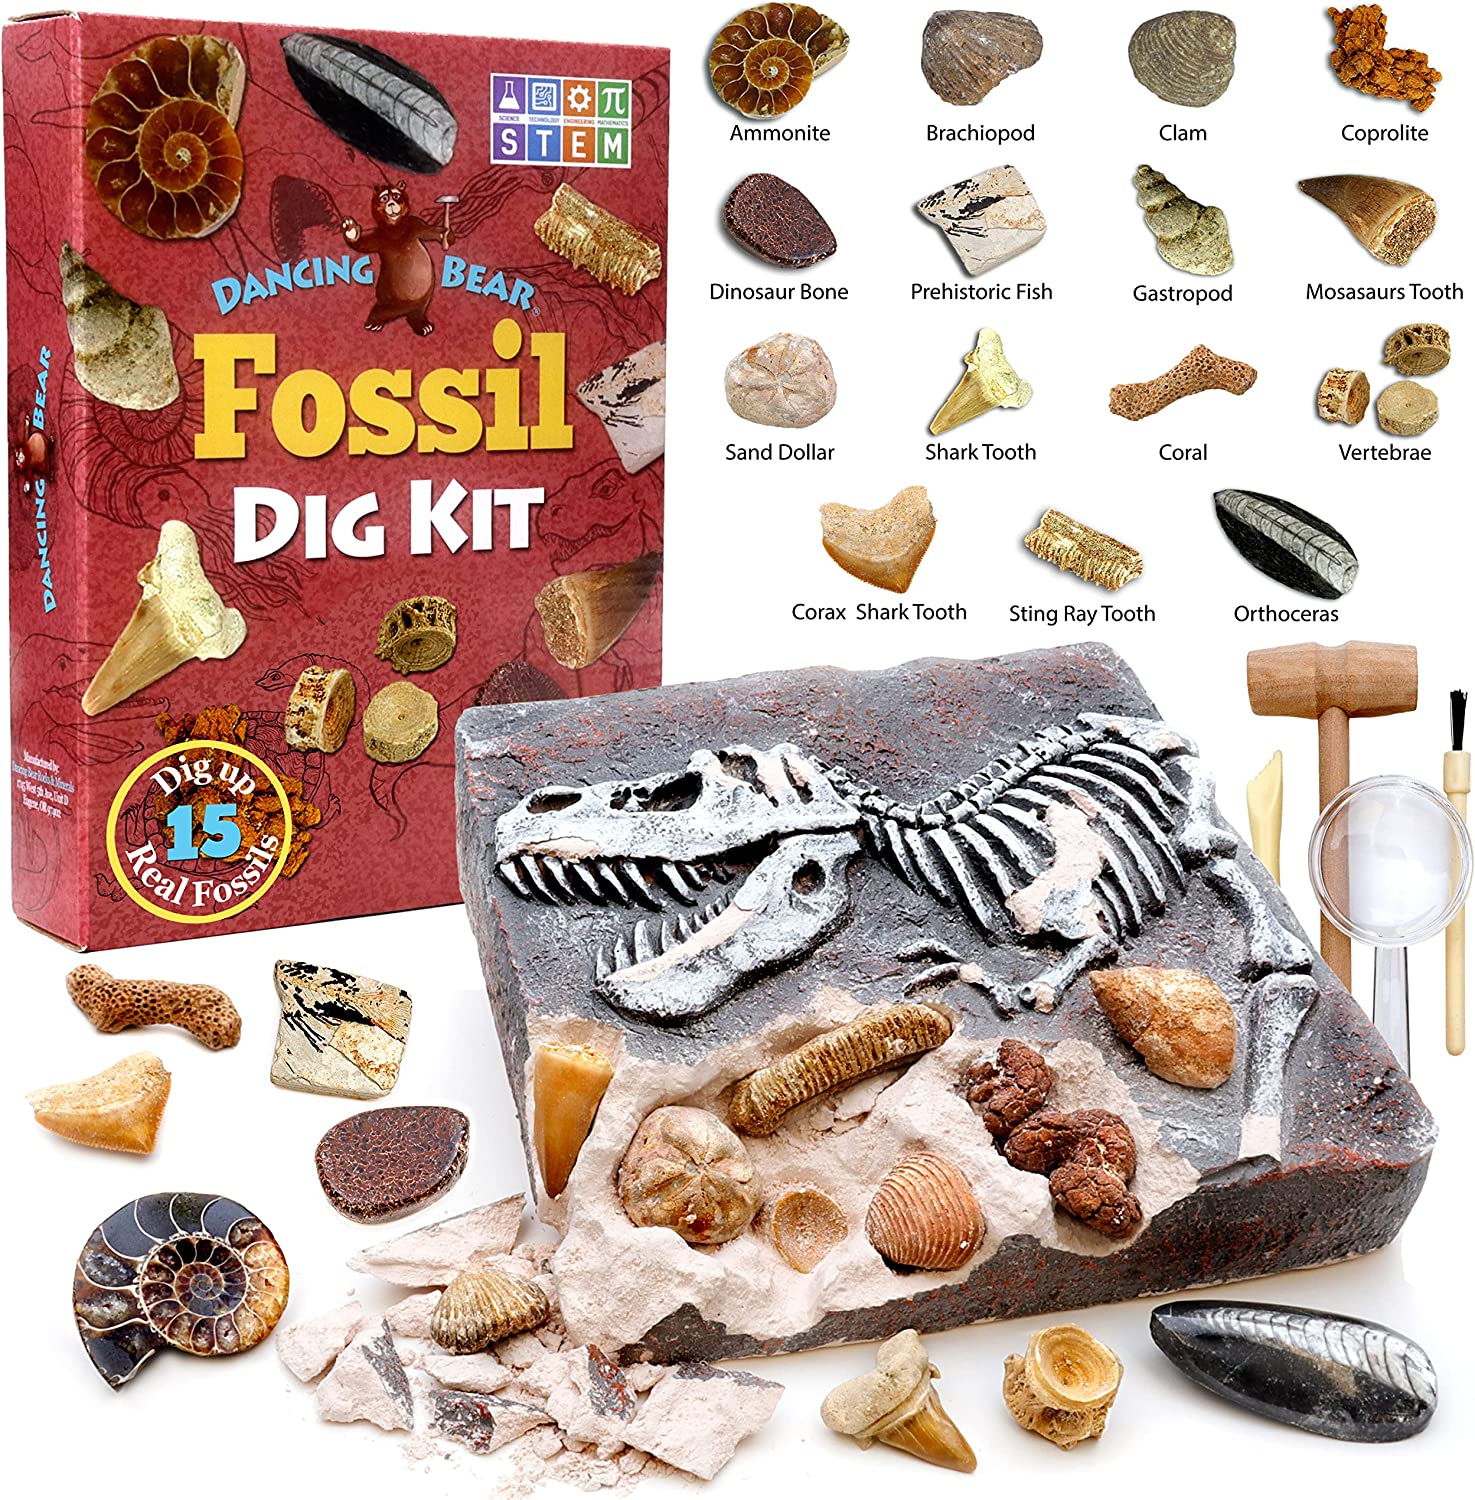 National Geographic Mega Fossil and Gemstone Dig Kits - Excavate 20 Real Fossils and Gems, Great Stem Science Gift for Mineralogy and Geology